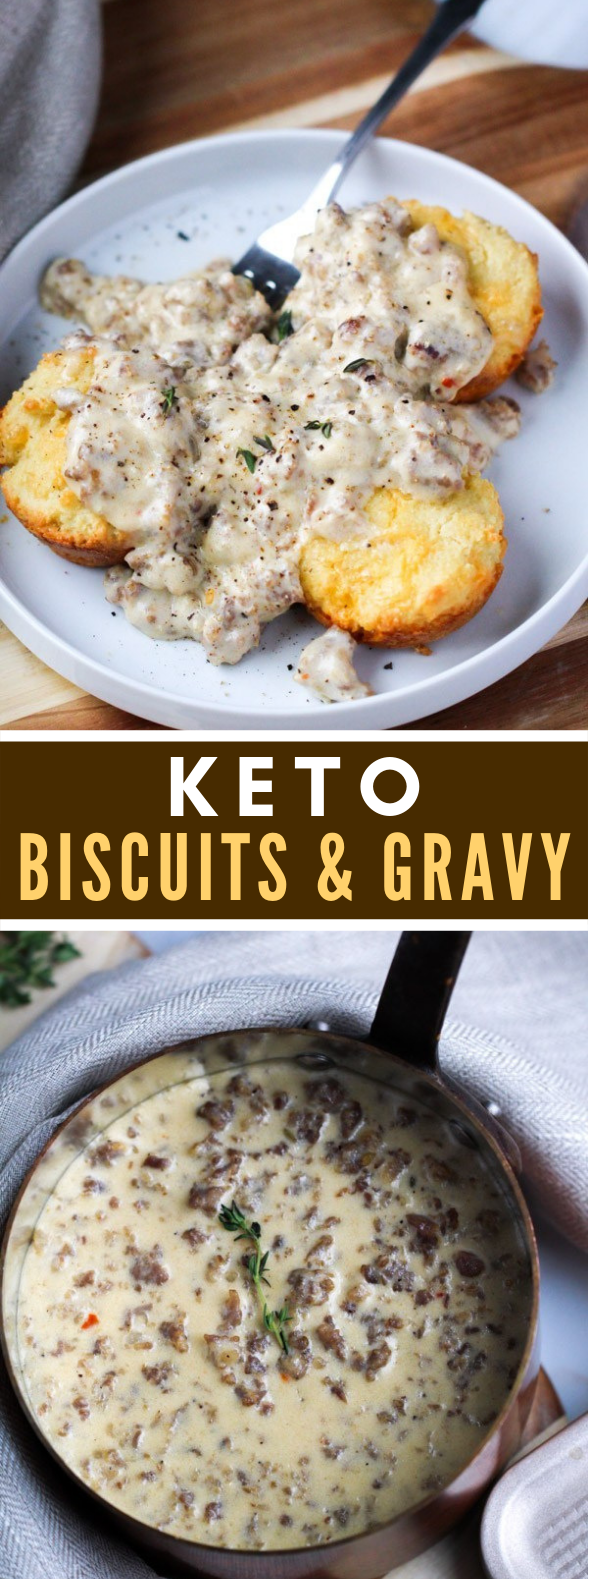 KETO BISCUITS AND GRAVY #healthy #breakfast